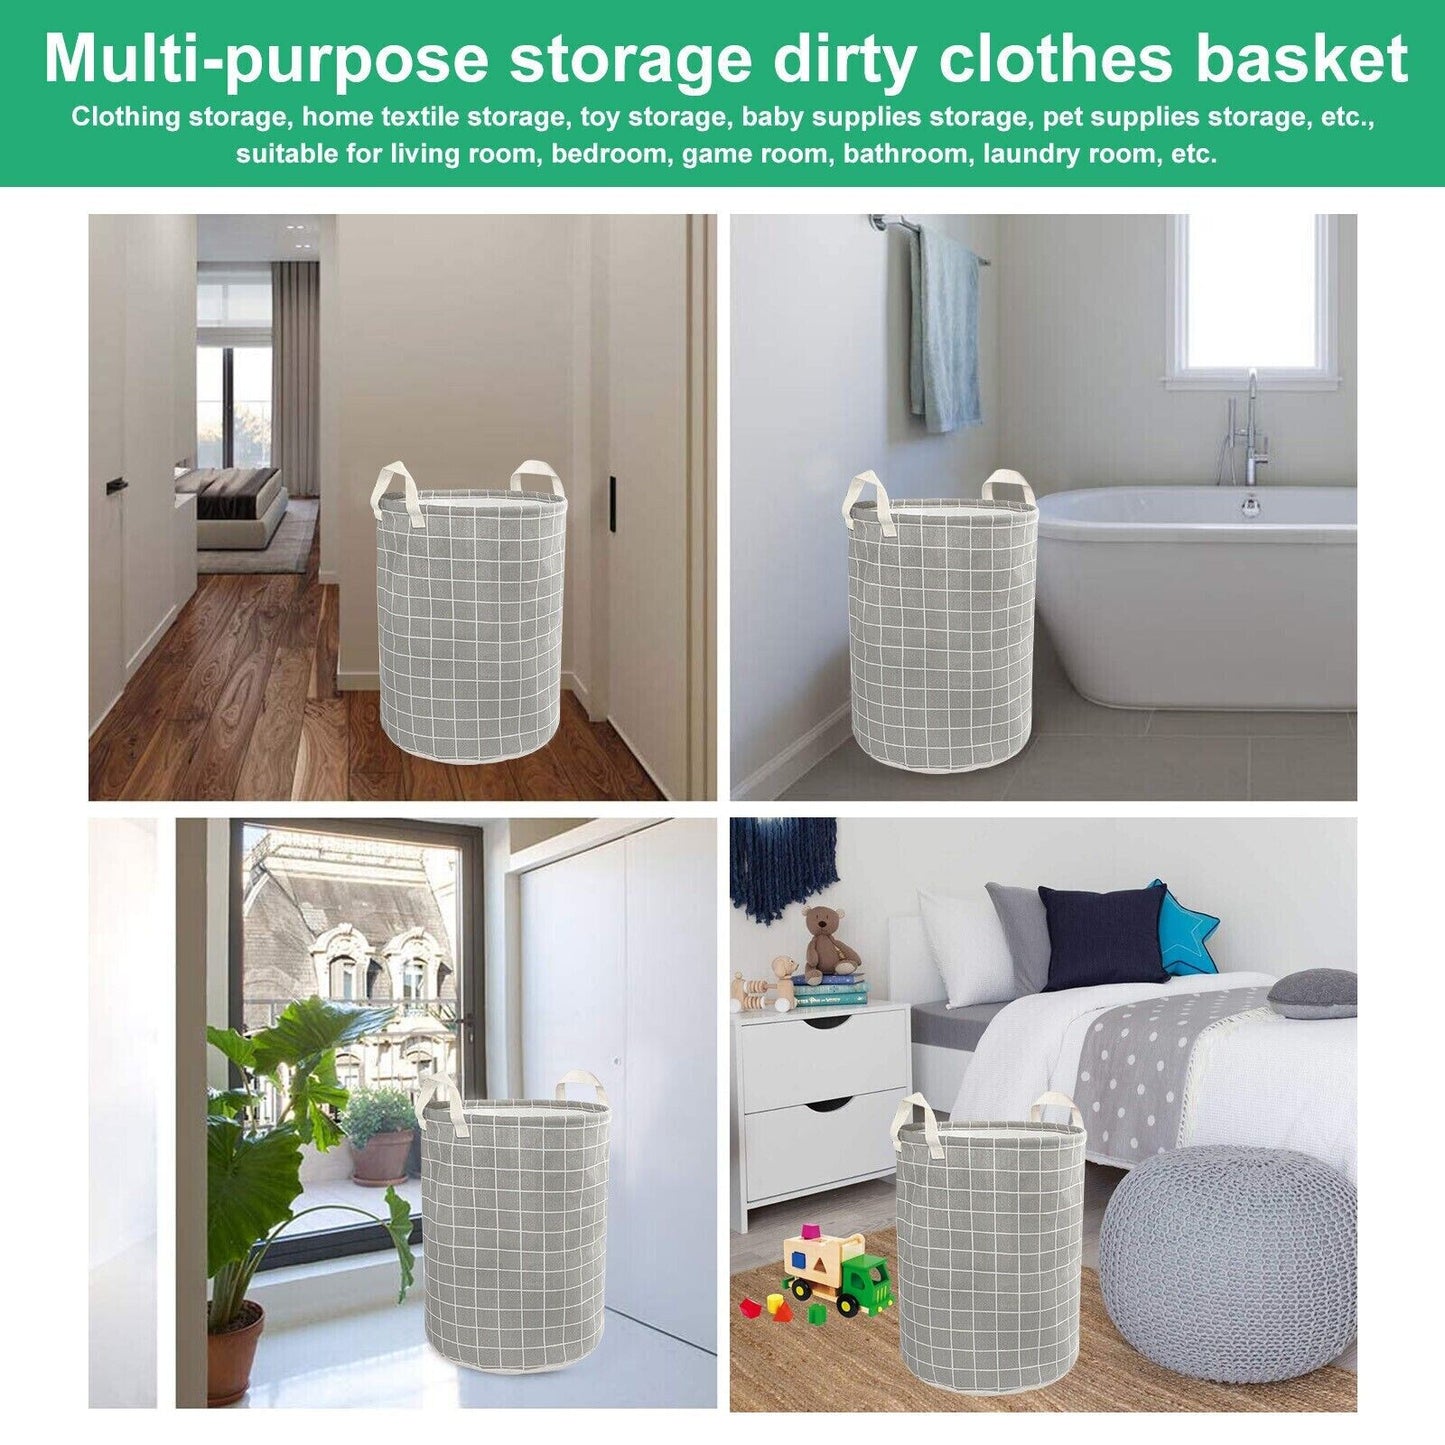 Collapsible laundry basket placements